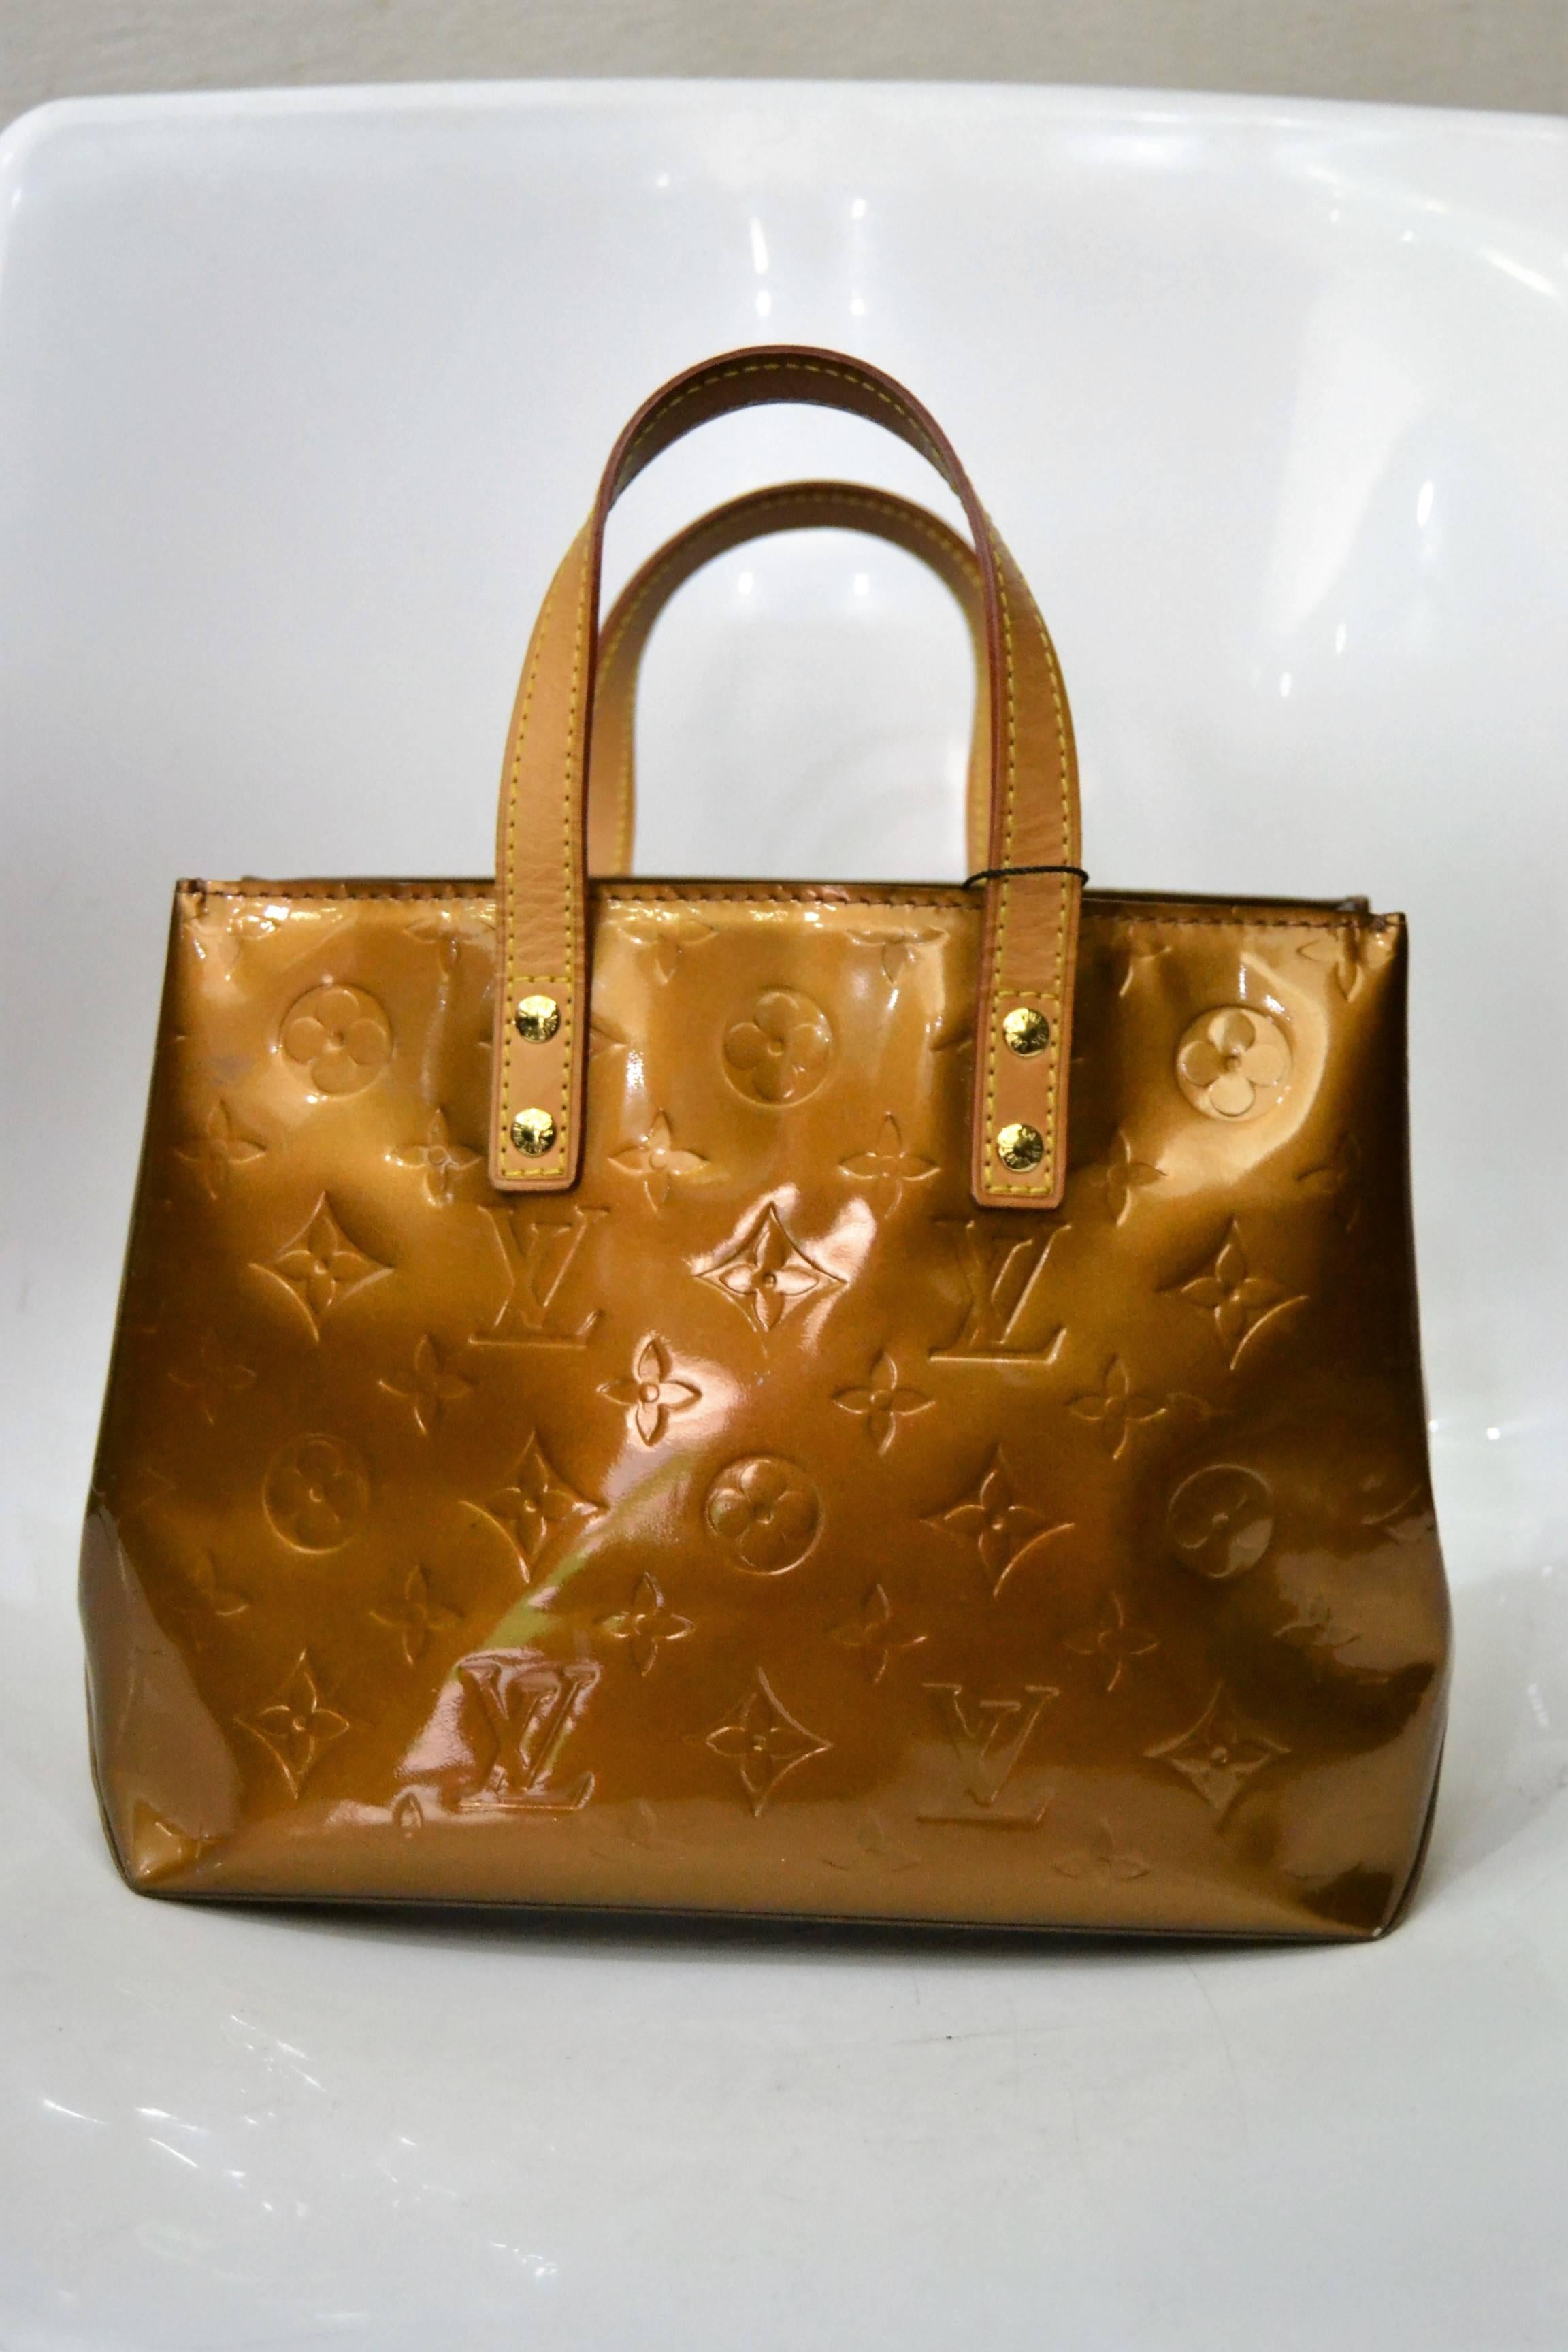 Louis Vuitton Vernis Bronze Leather Bag
Louis Vuitton Reade  in Vernis leather. Inside fabric lining and has 1 zipper pocket. Comfortably carried in hand with cowhide 
leather handles

Made in: France